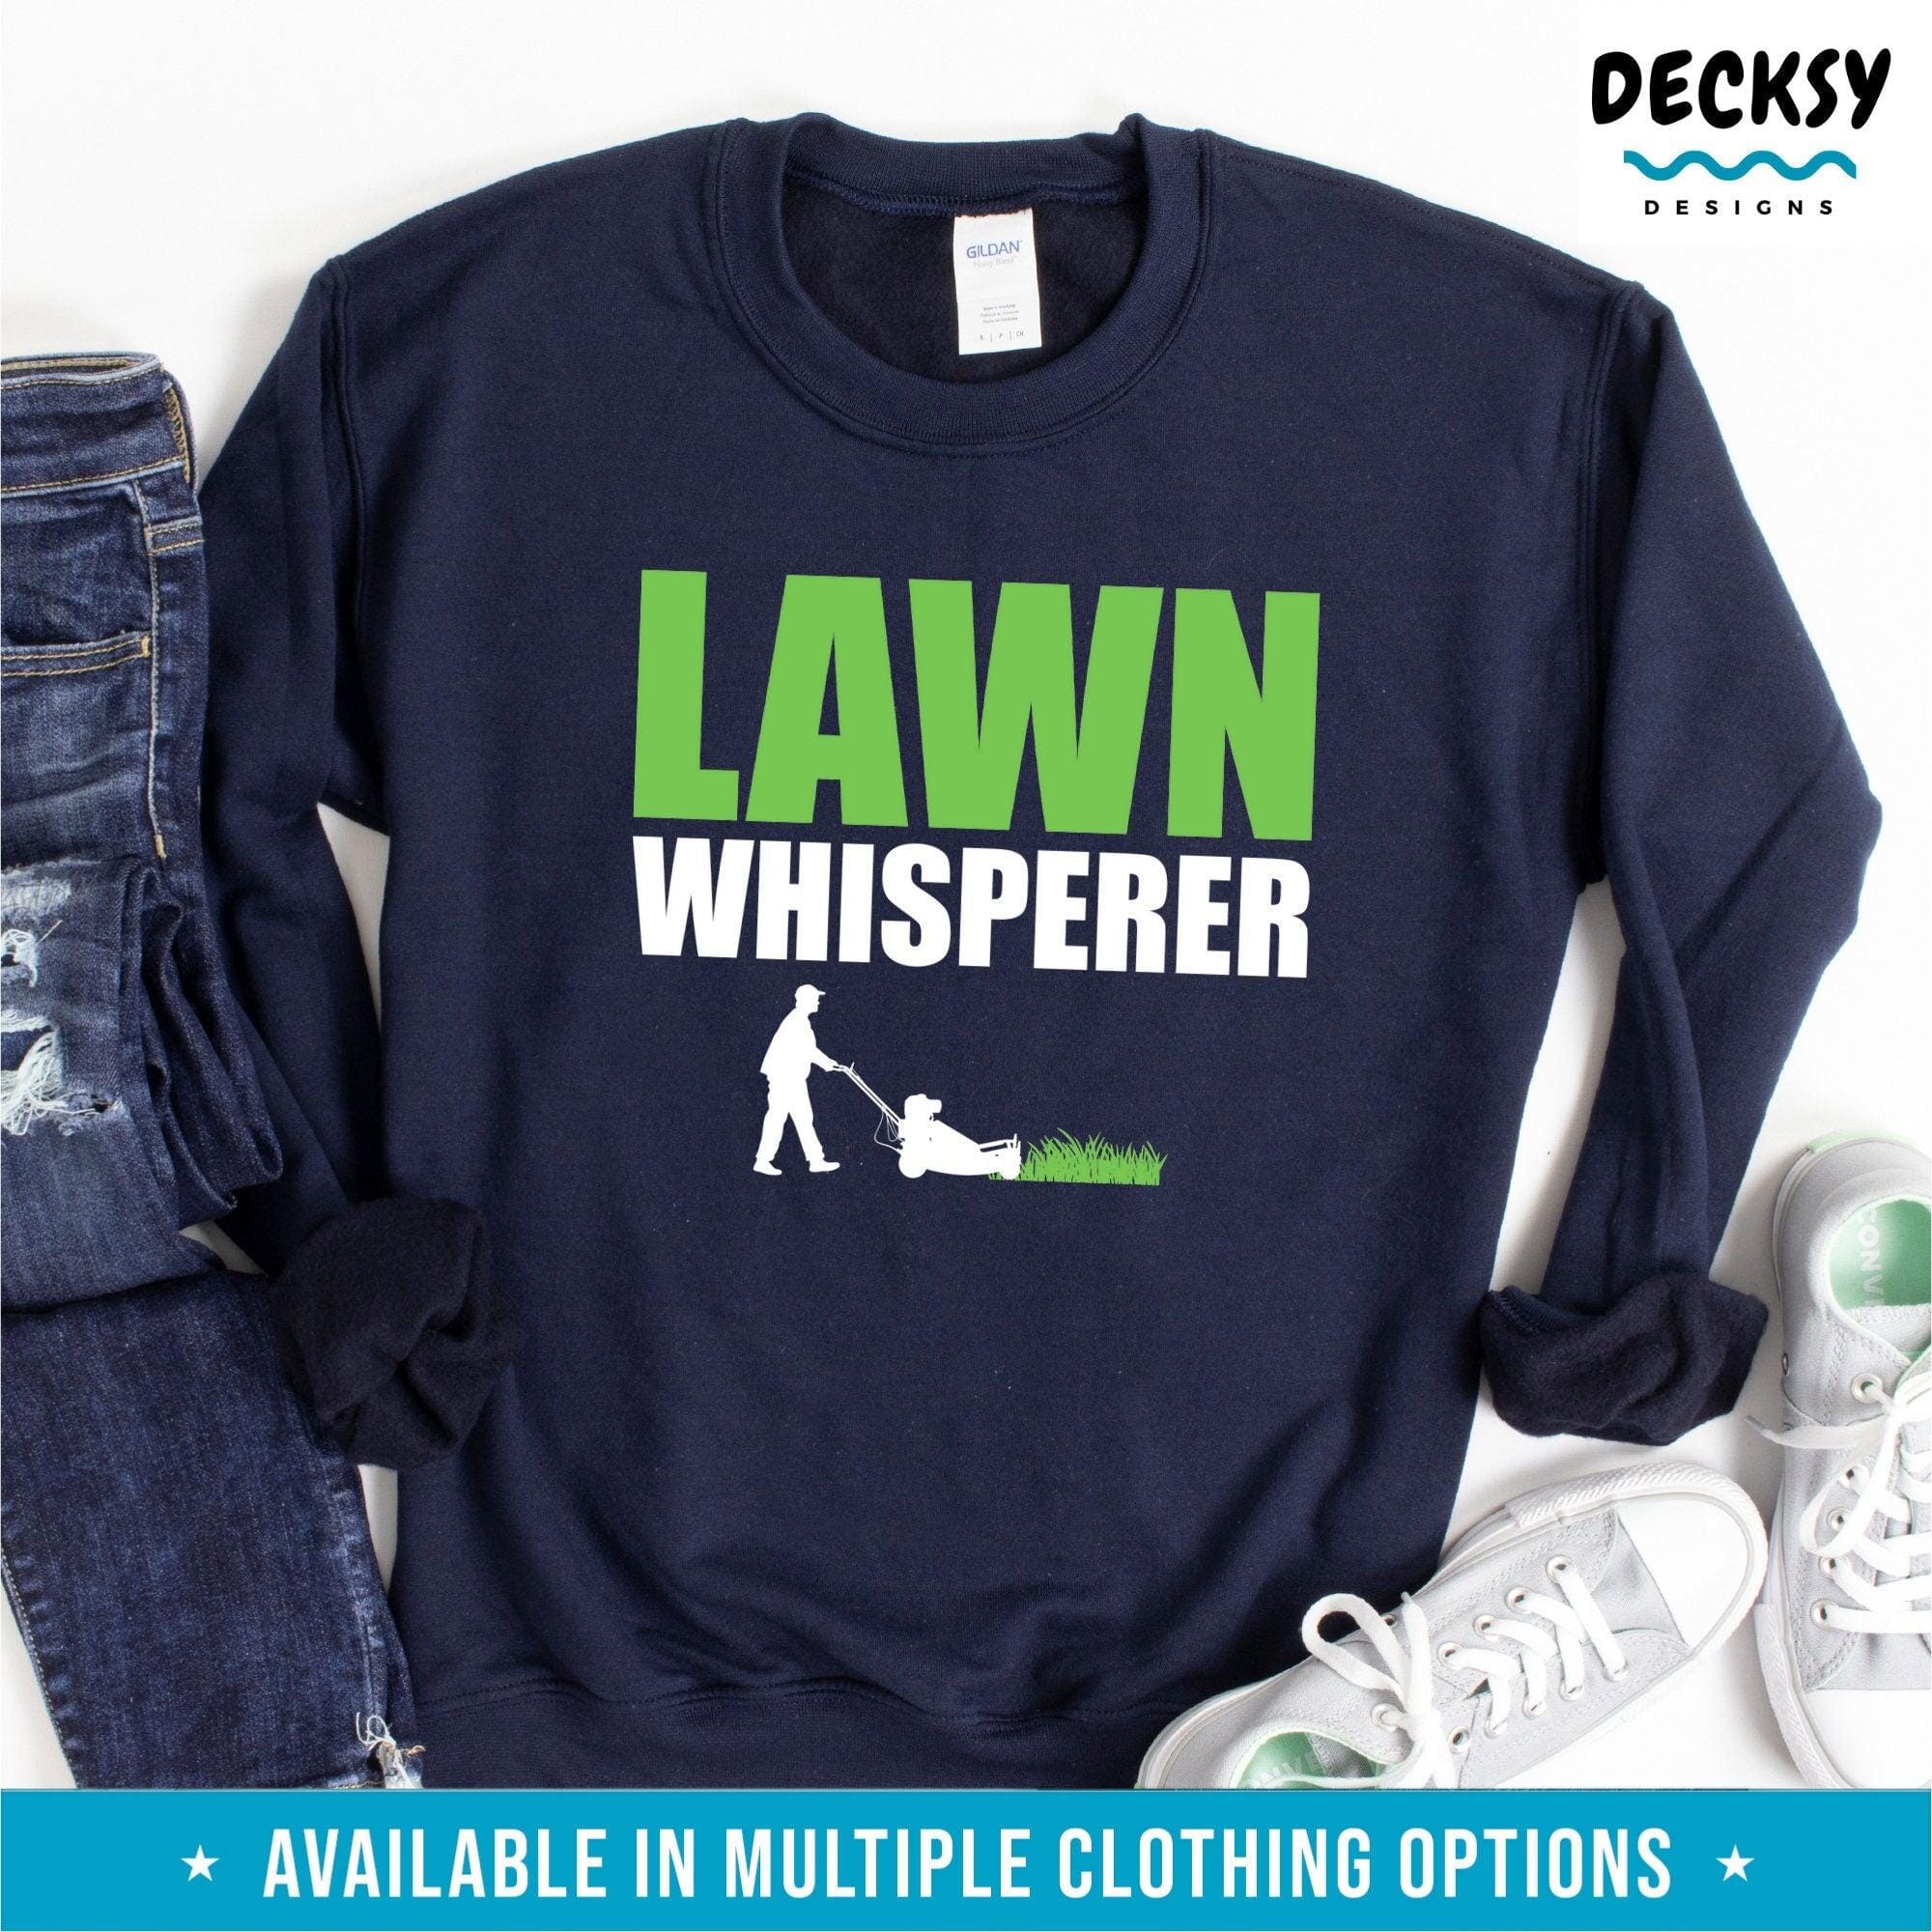 Lawn Mowing T Shirt, Mower Gift-Clothing:Gender-Neutral Adult Clothing:Tops & Tees:T-shirts:Graphic Tees-DecksyDesigns